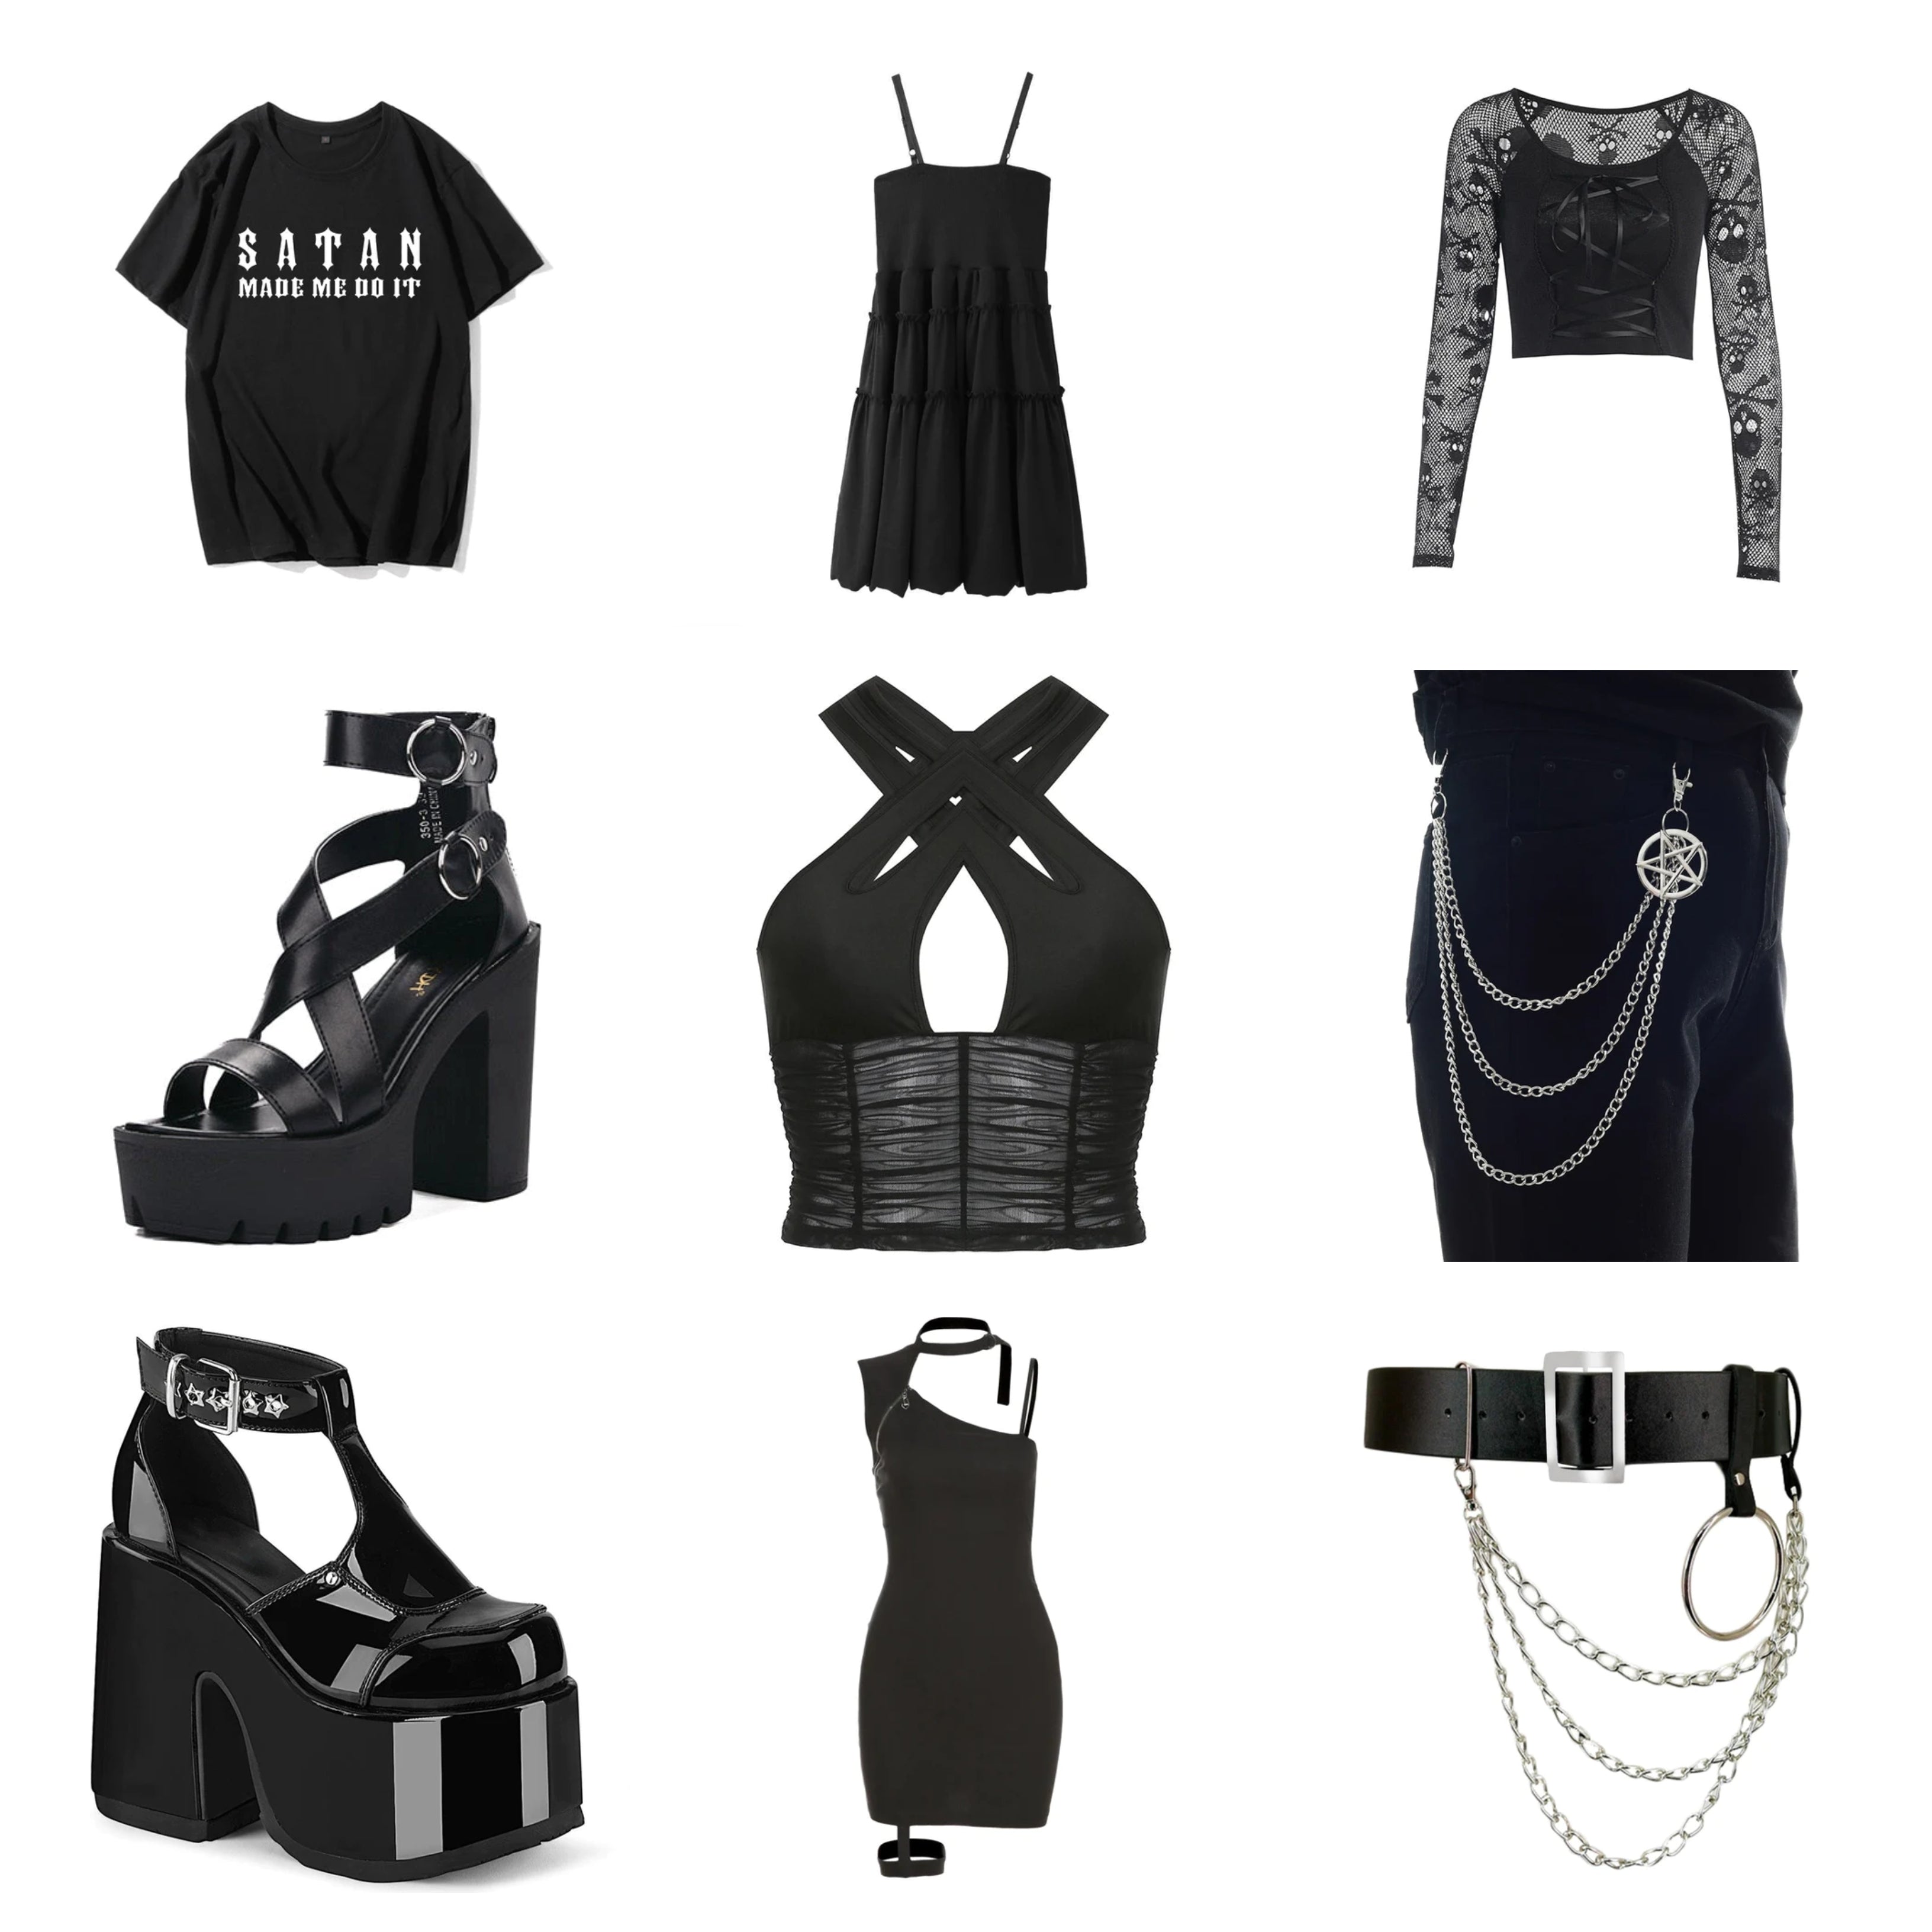 ULTIMATE Bad Girl Outfit Guide - Shoptery